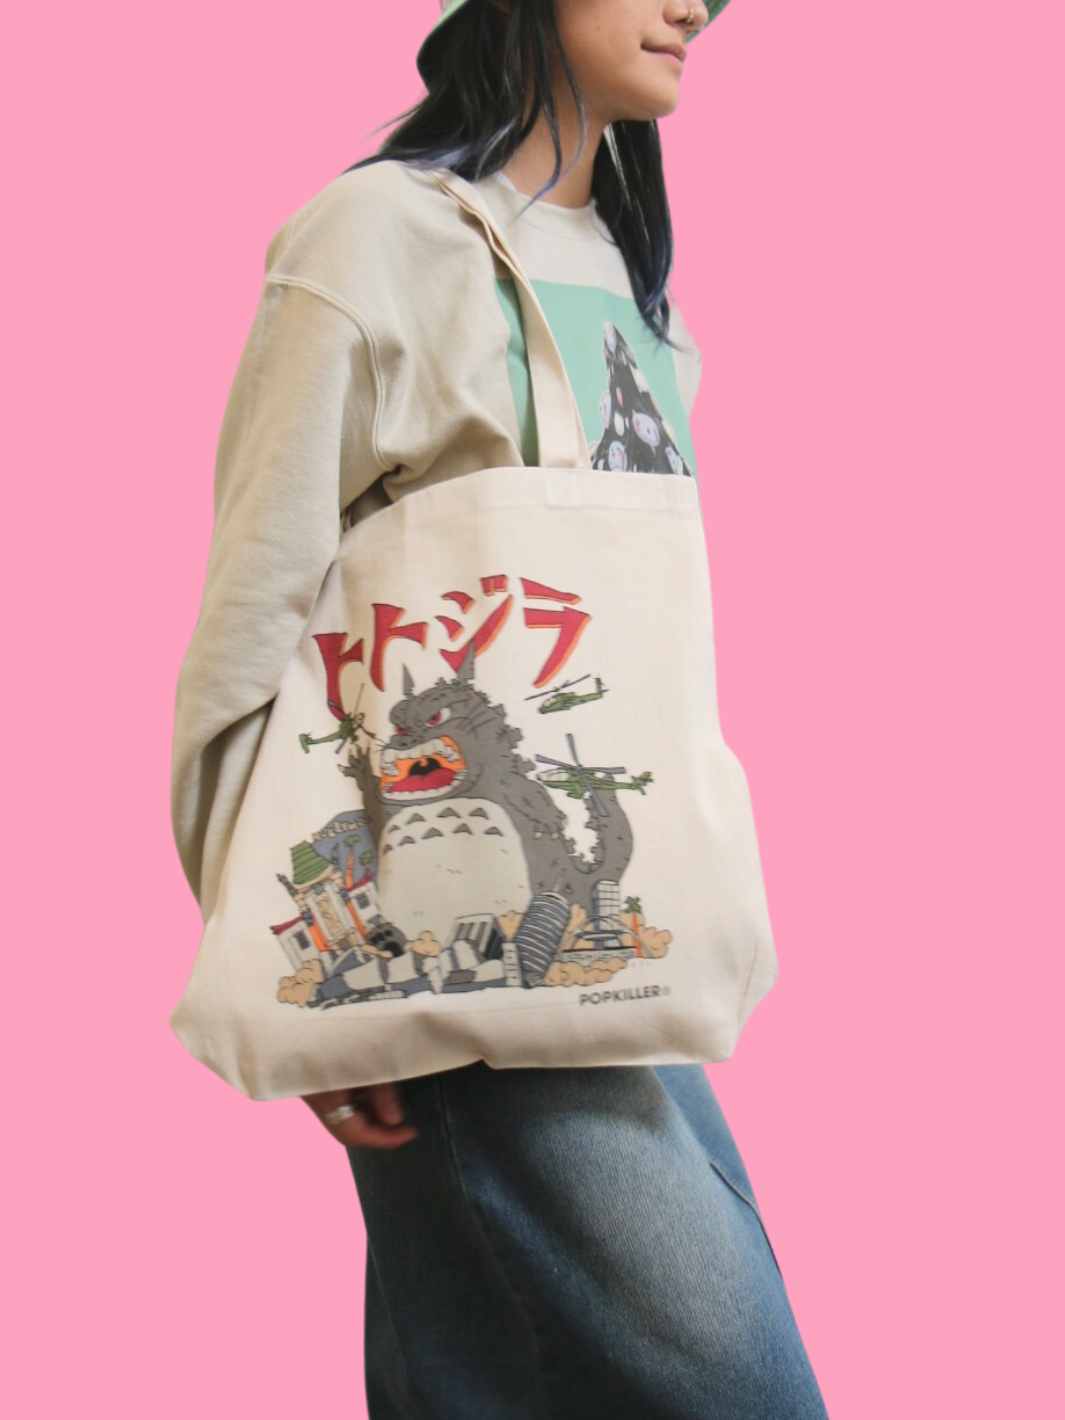 Tote Bags For Women +Cooler Totes - Dear Creatives